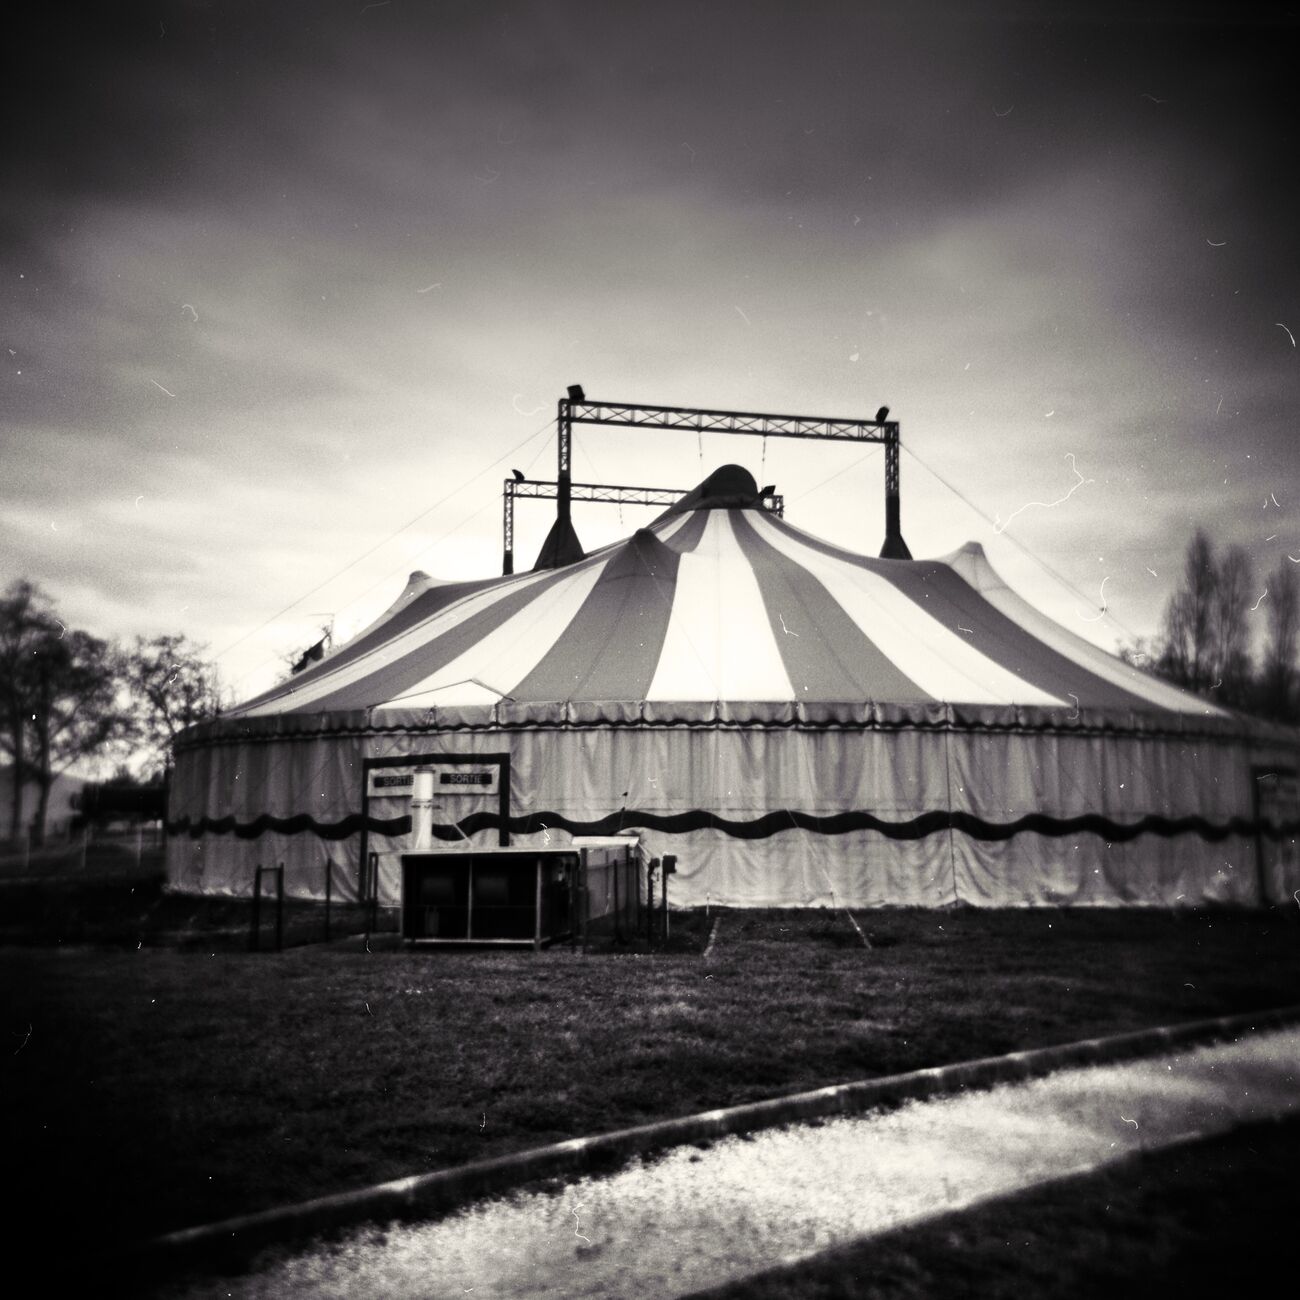 Circus, Bordeaux, France. March 2007. Ref-1073 - Denis Olivier Photography